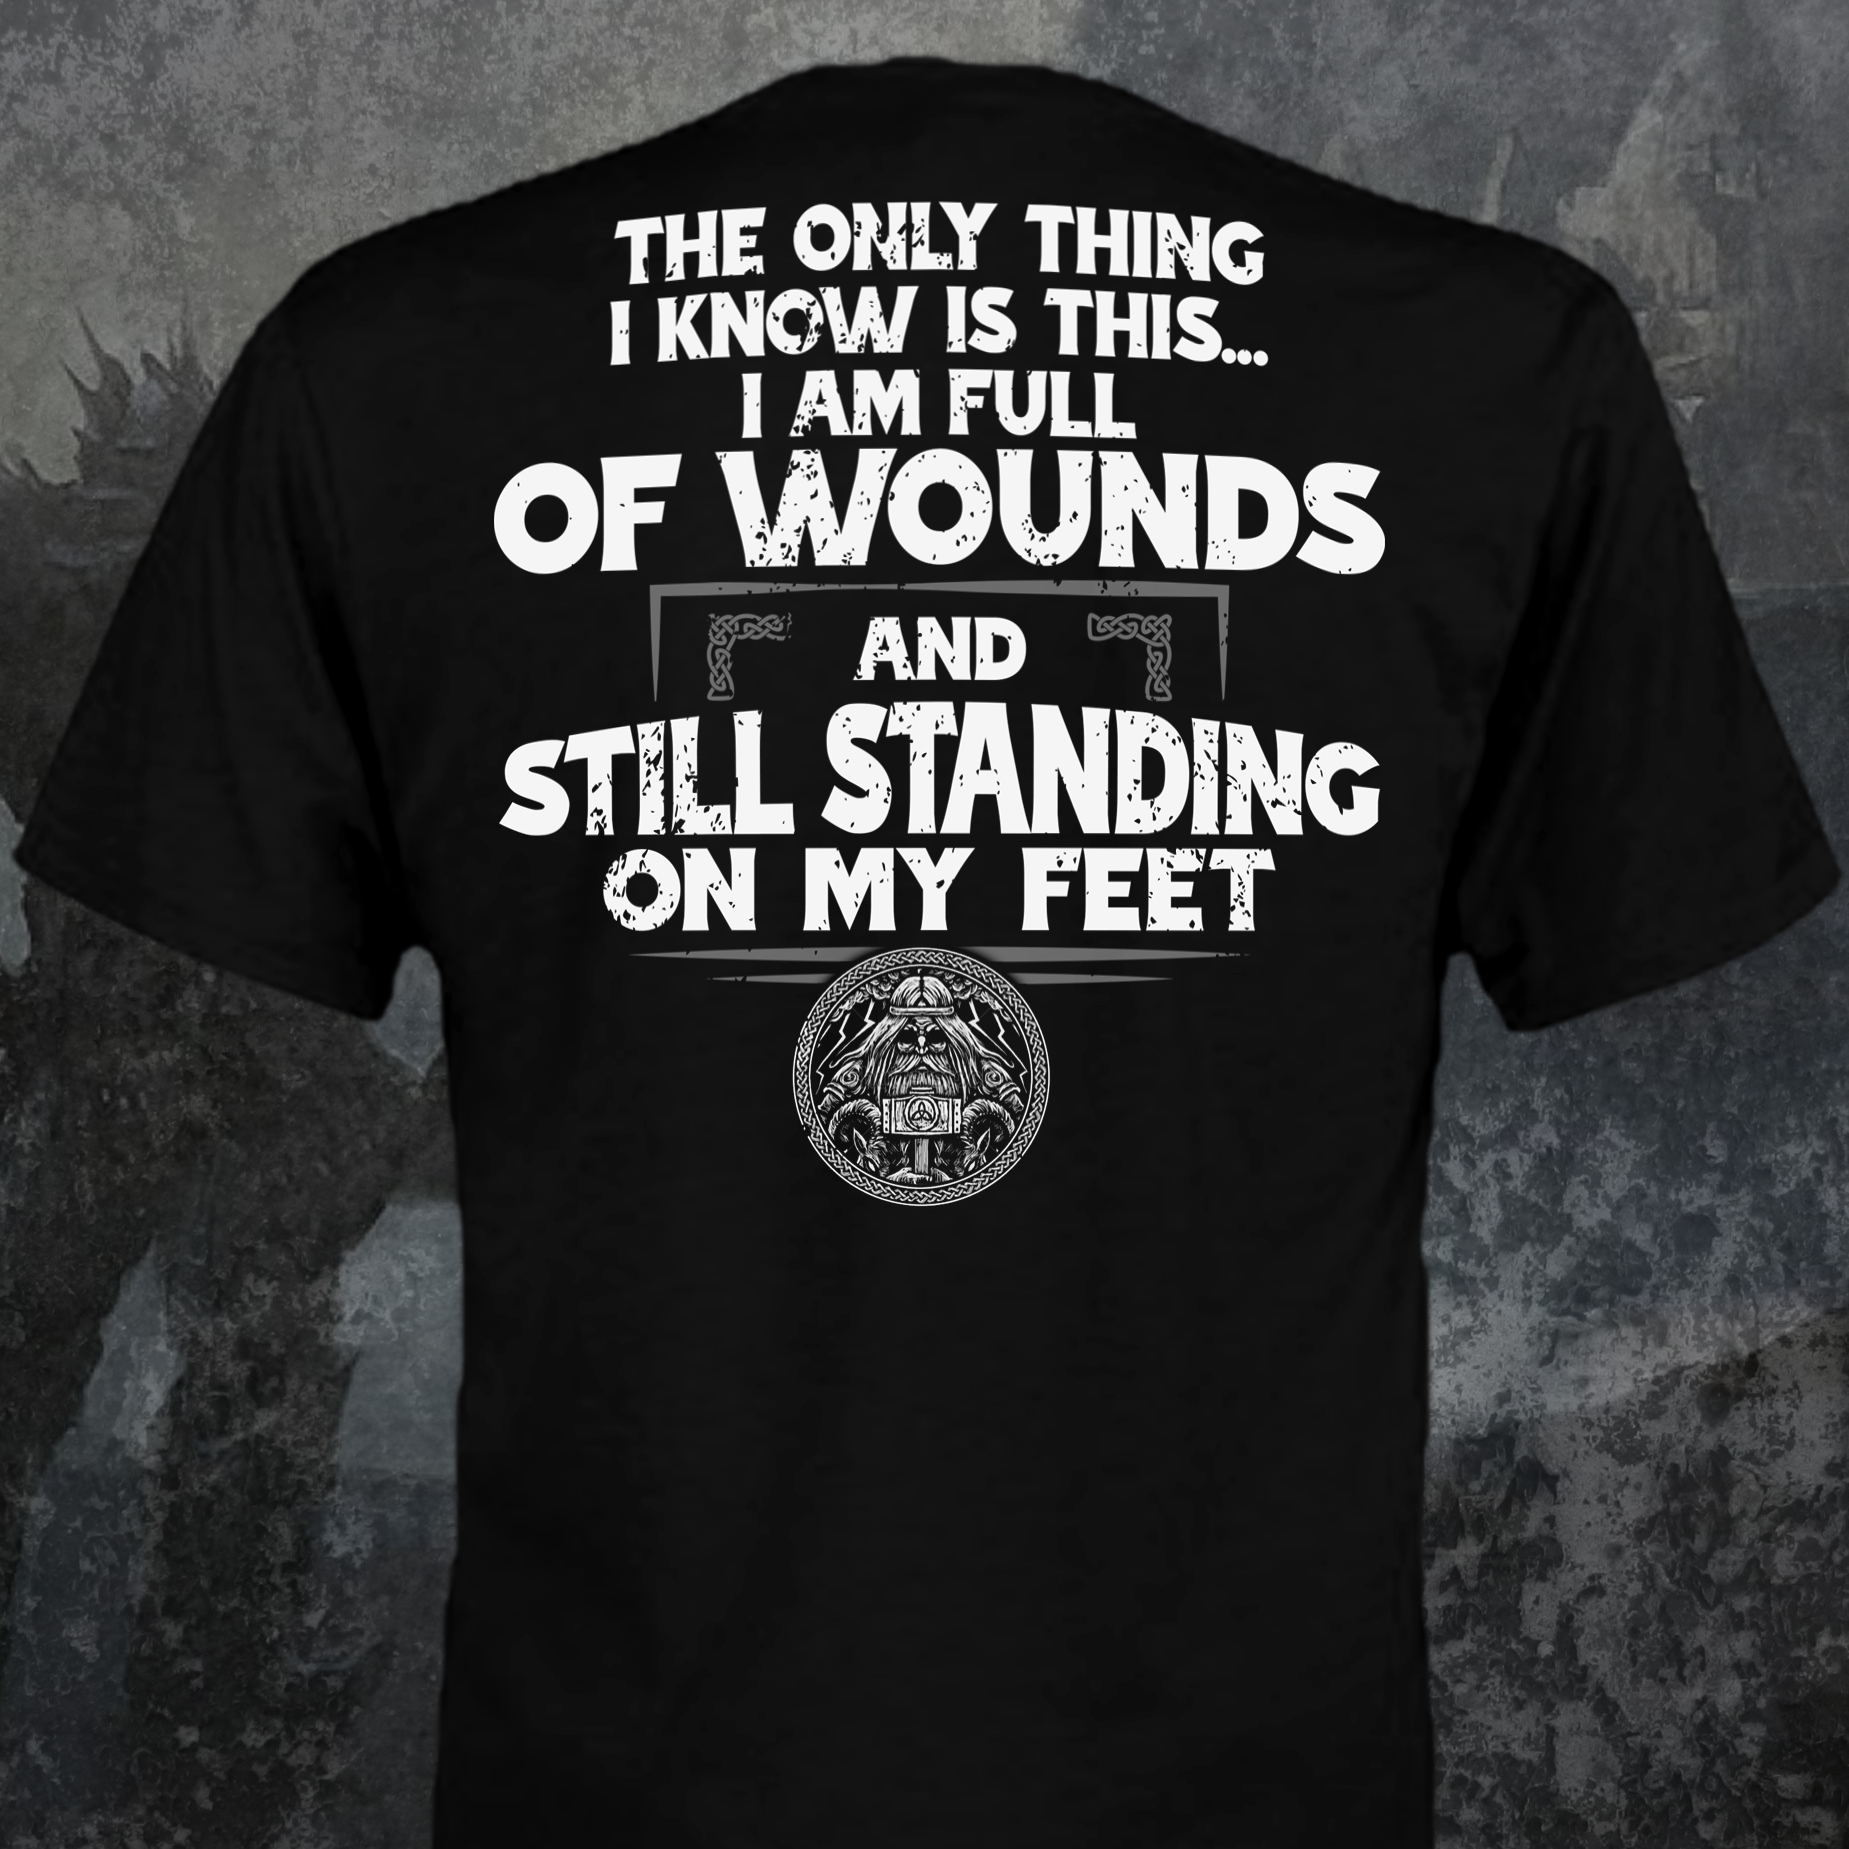 The only thing I know is this I am full of wounds and still standing on my feet - Viking guy